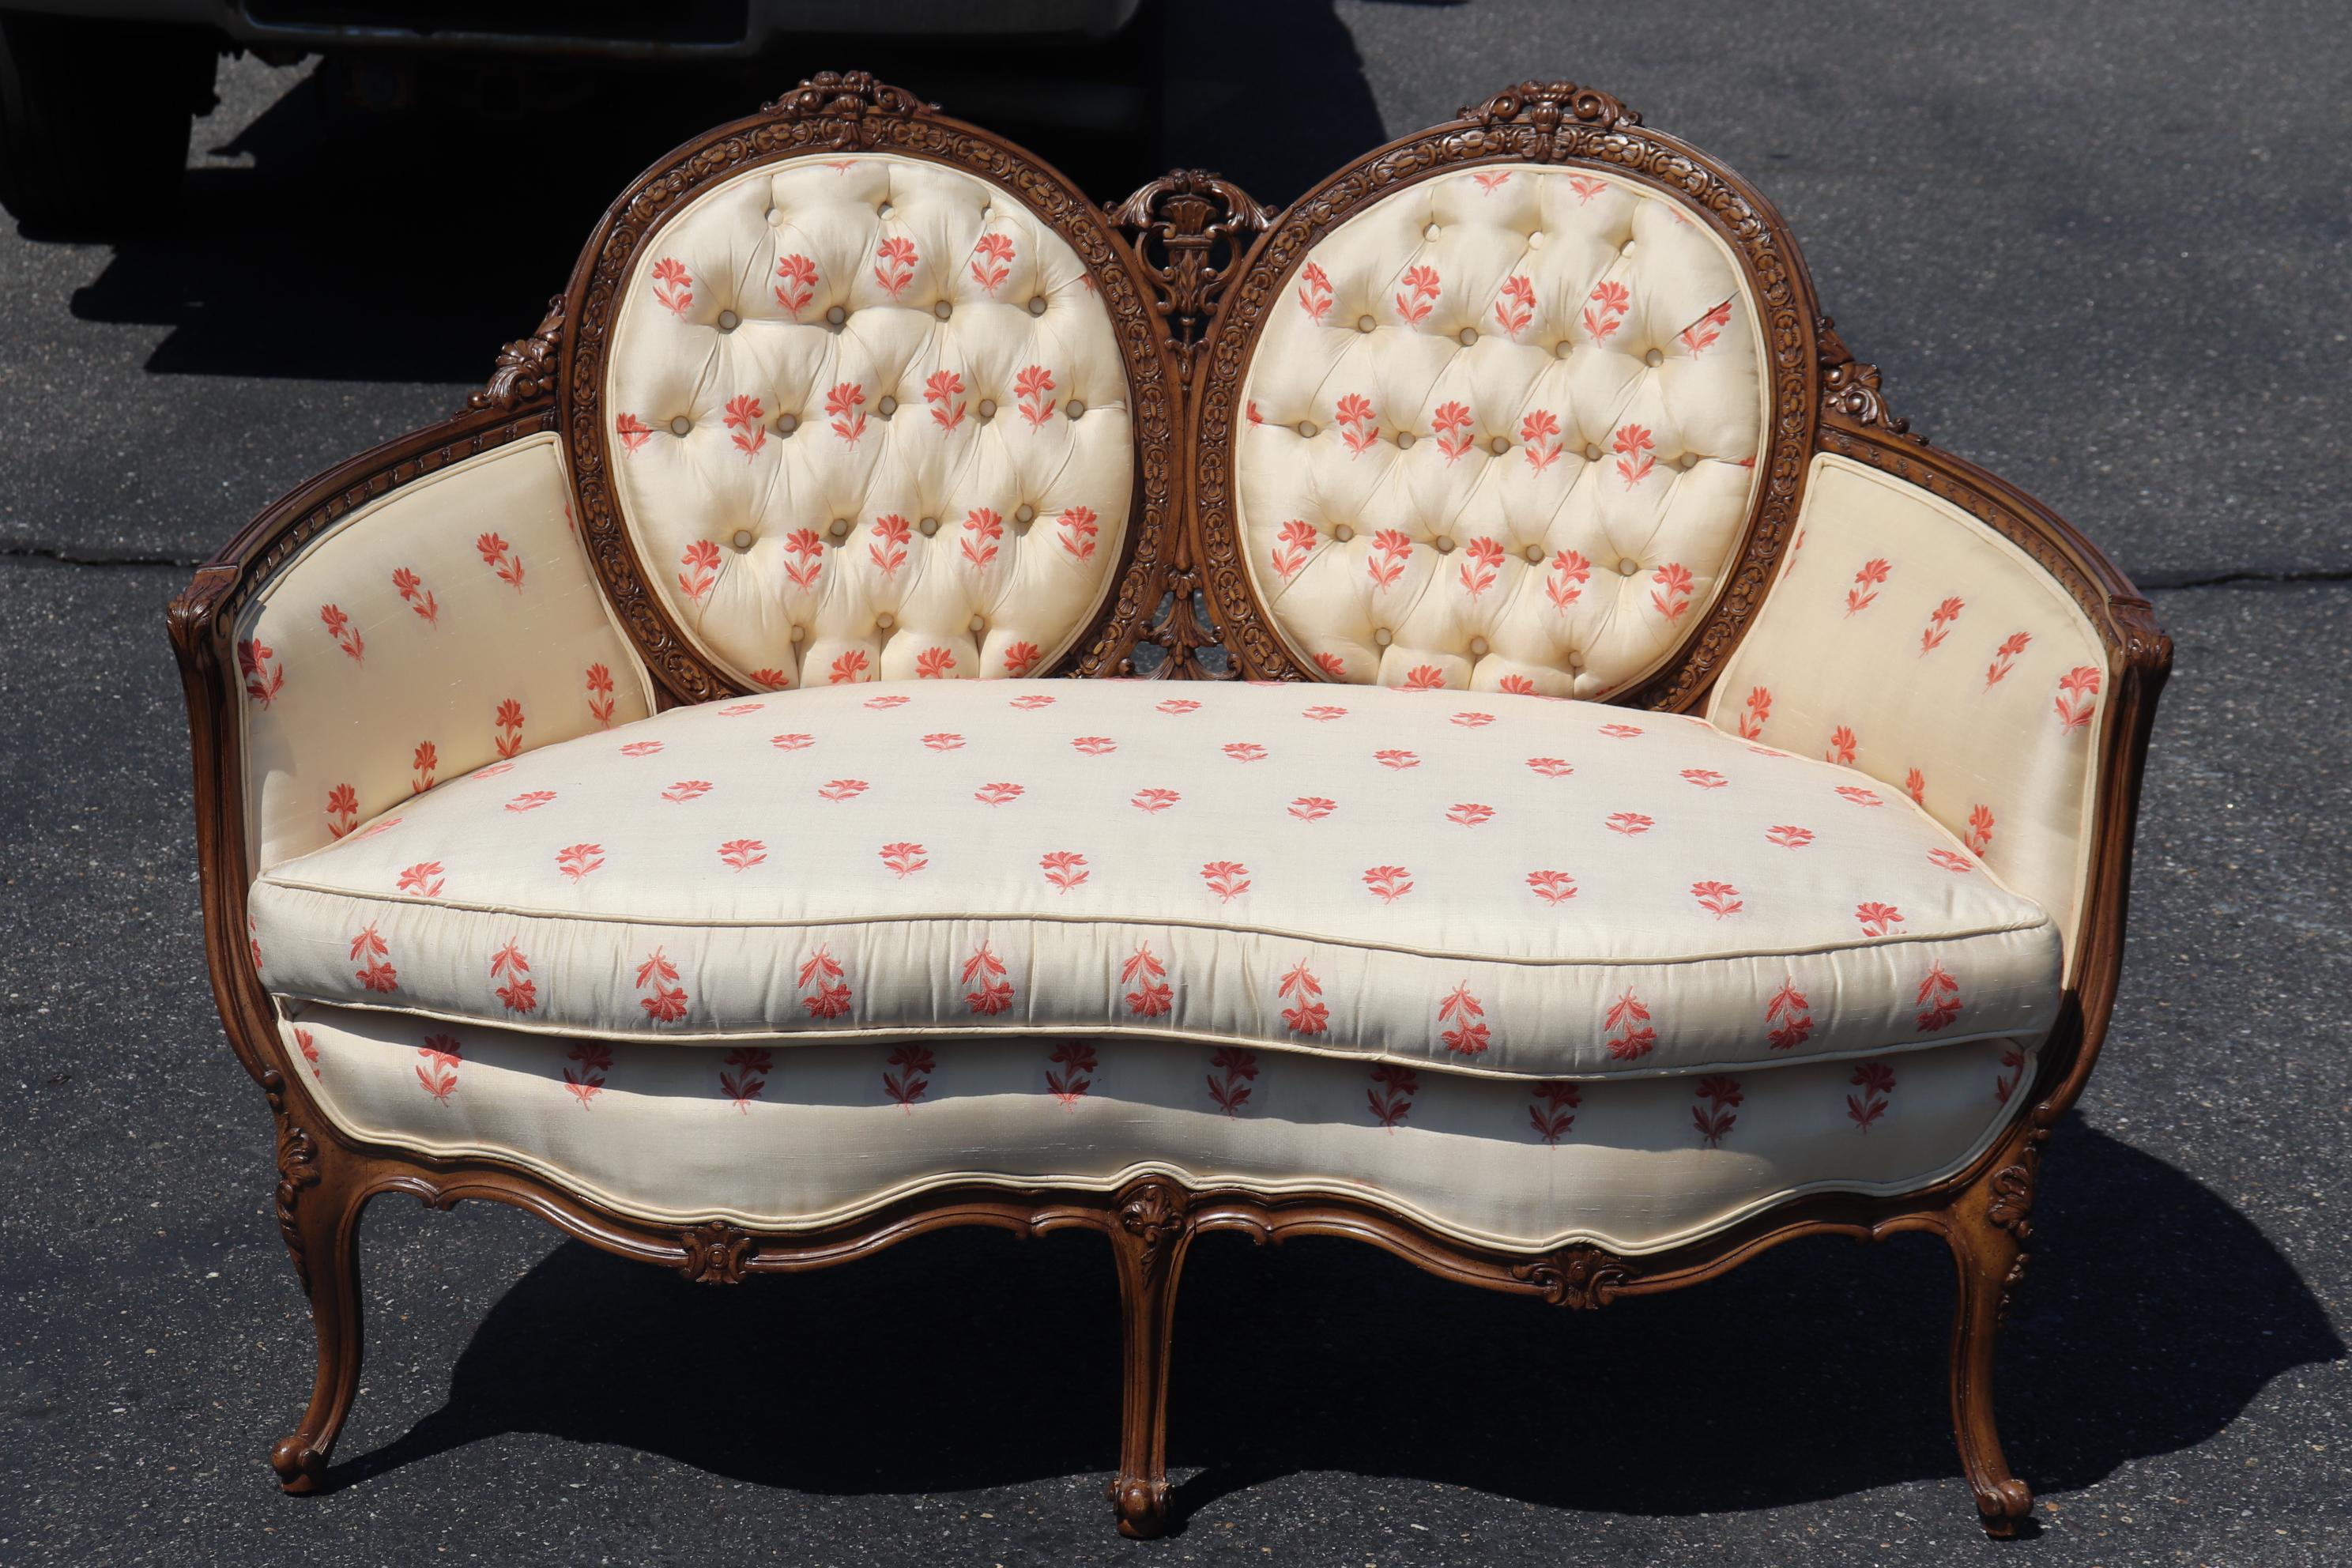 This is a a beautiful form of cameo back Louis XV settee. The upholstery is ok everywhere but the back which is torn. It could be replaced with a similar or contrasting material. The settee is in otherwise good condition and measures 54 wide x 32